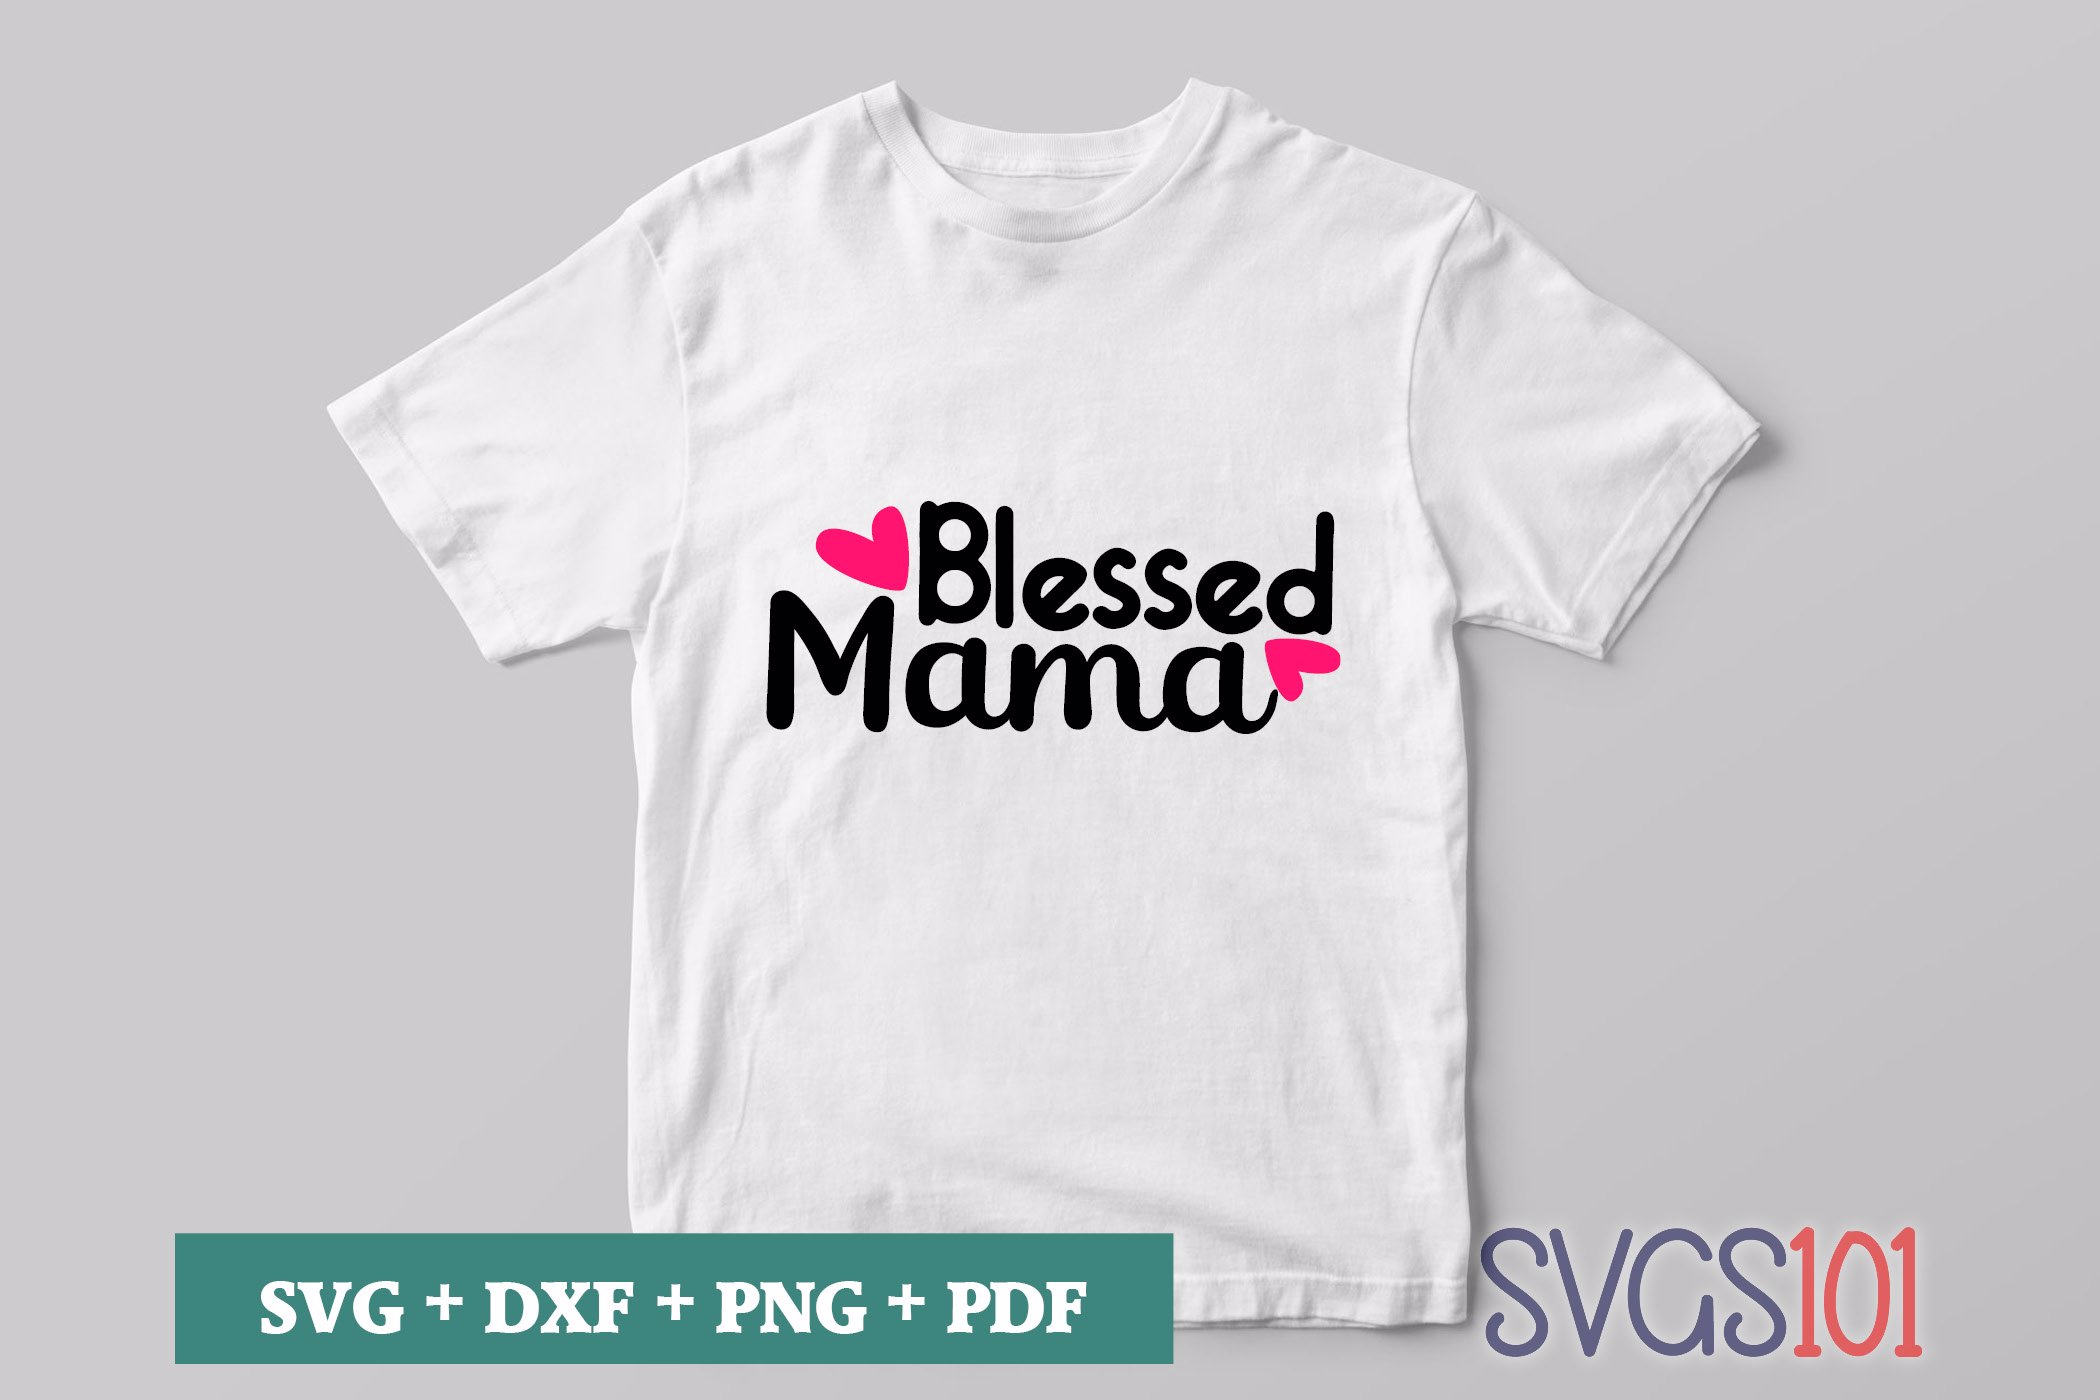 Blessed mama SVG Cuttable file - DXF, EPS, PNG, PDF | SVG Cutting File